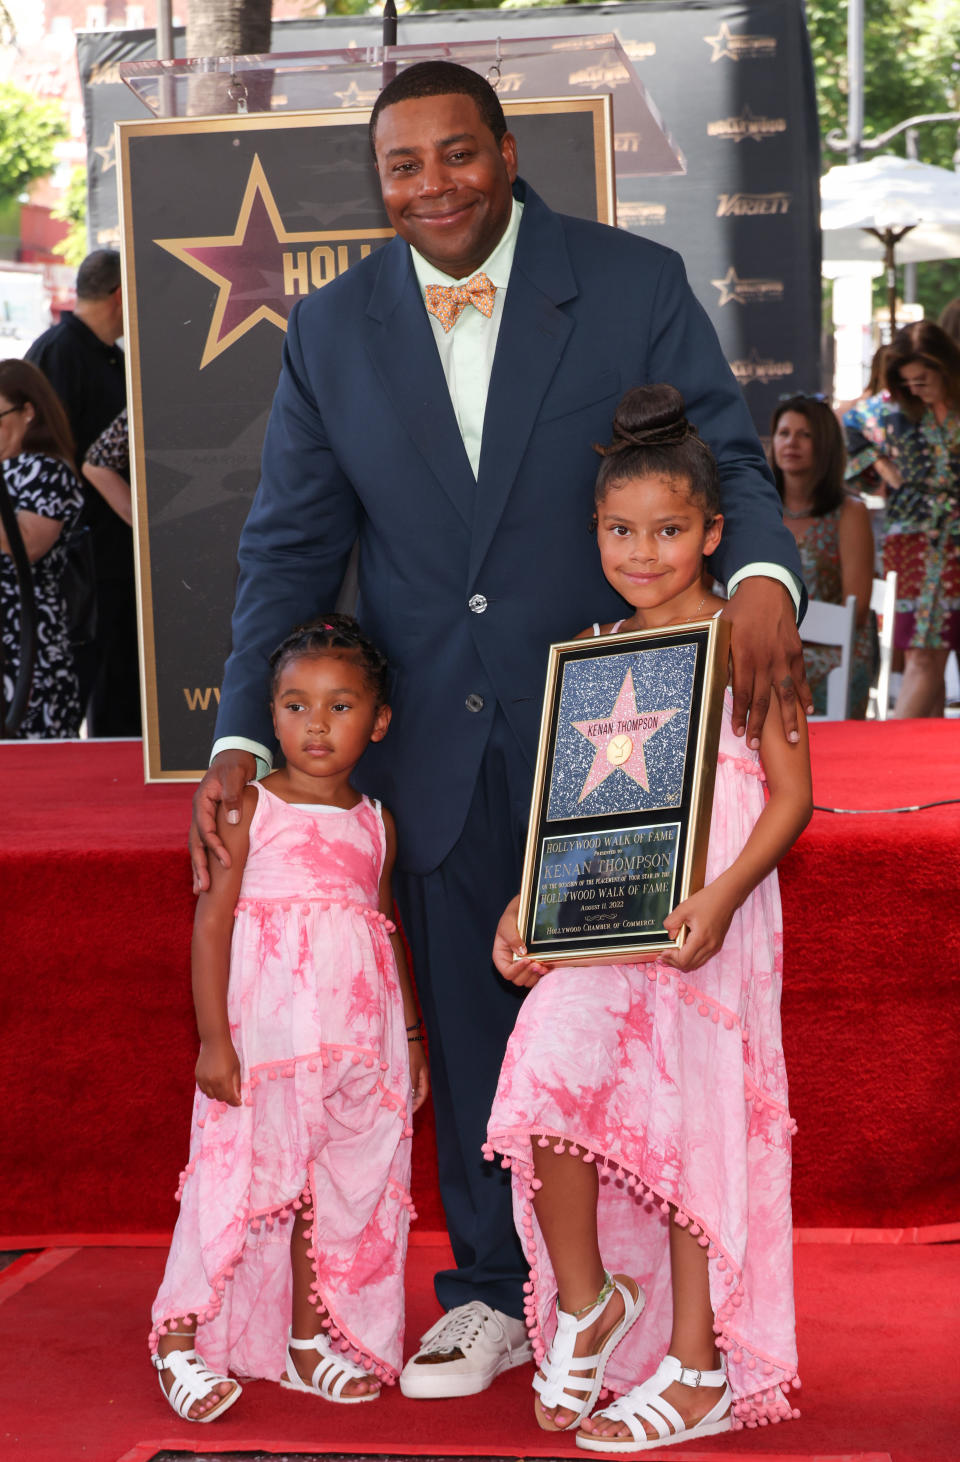 Kenan Thompson Honored With Star On The Hollywood Walk Of Fame (David Livingston / Getty Images)